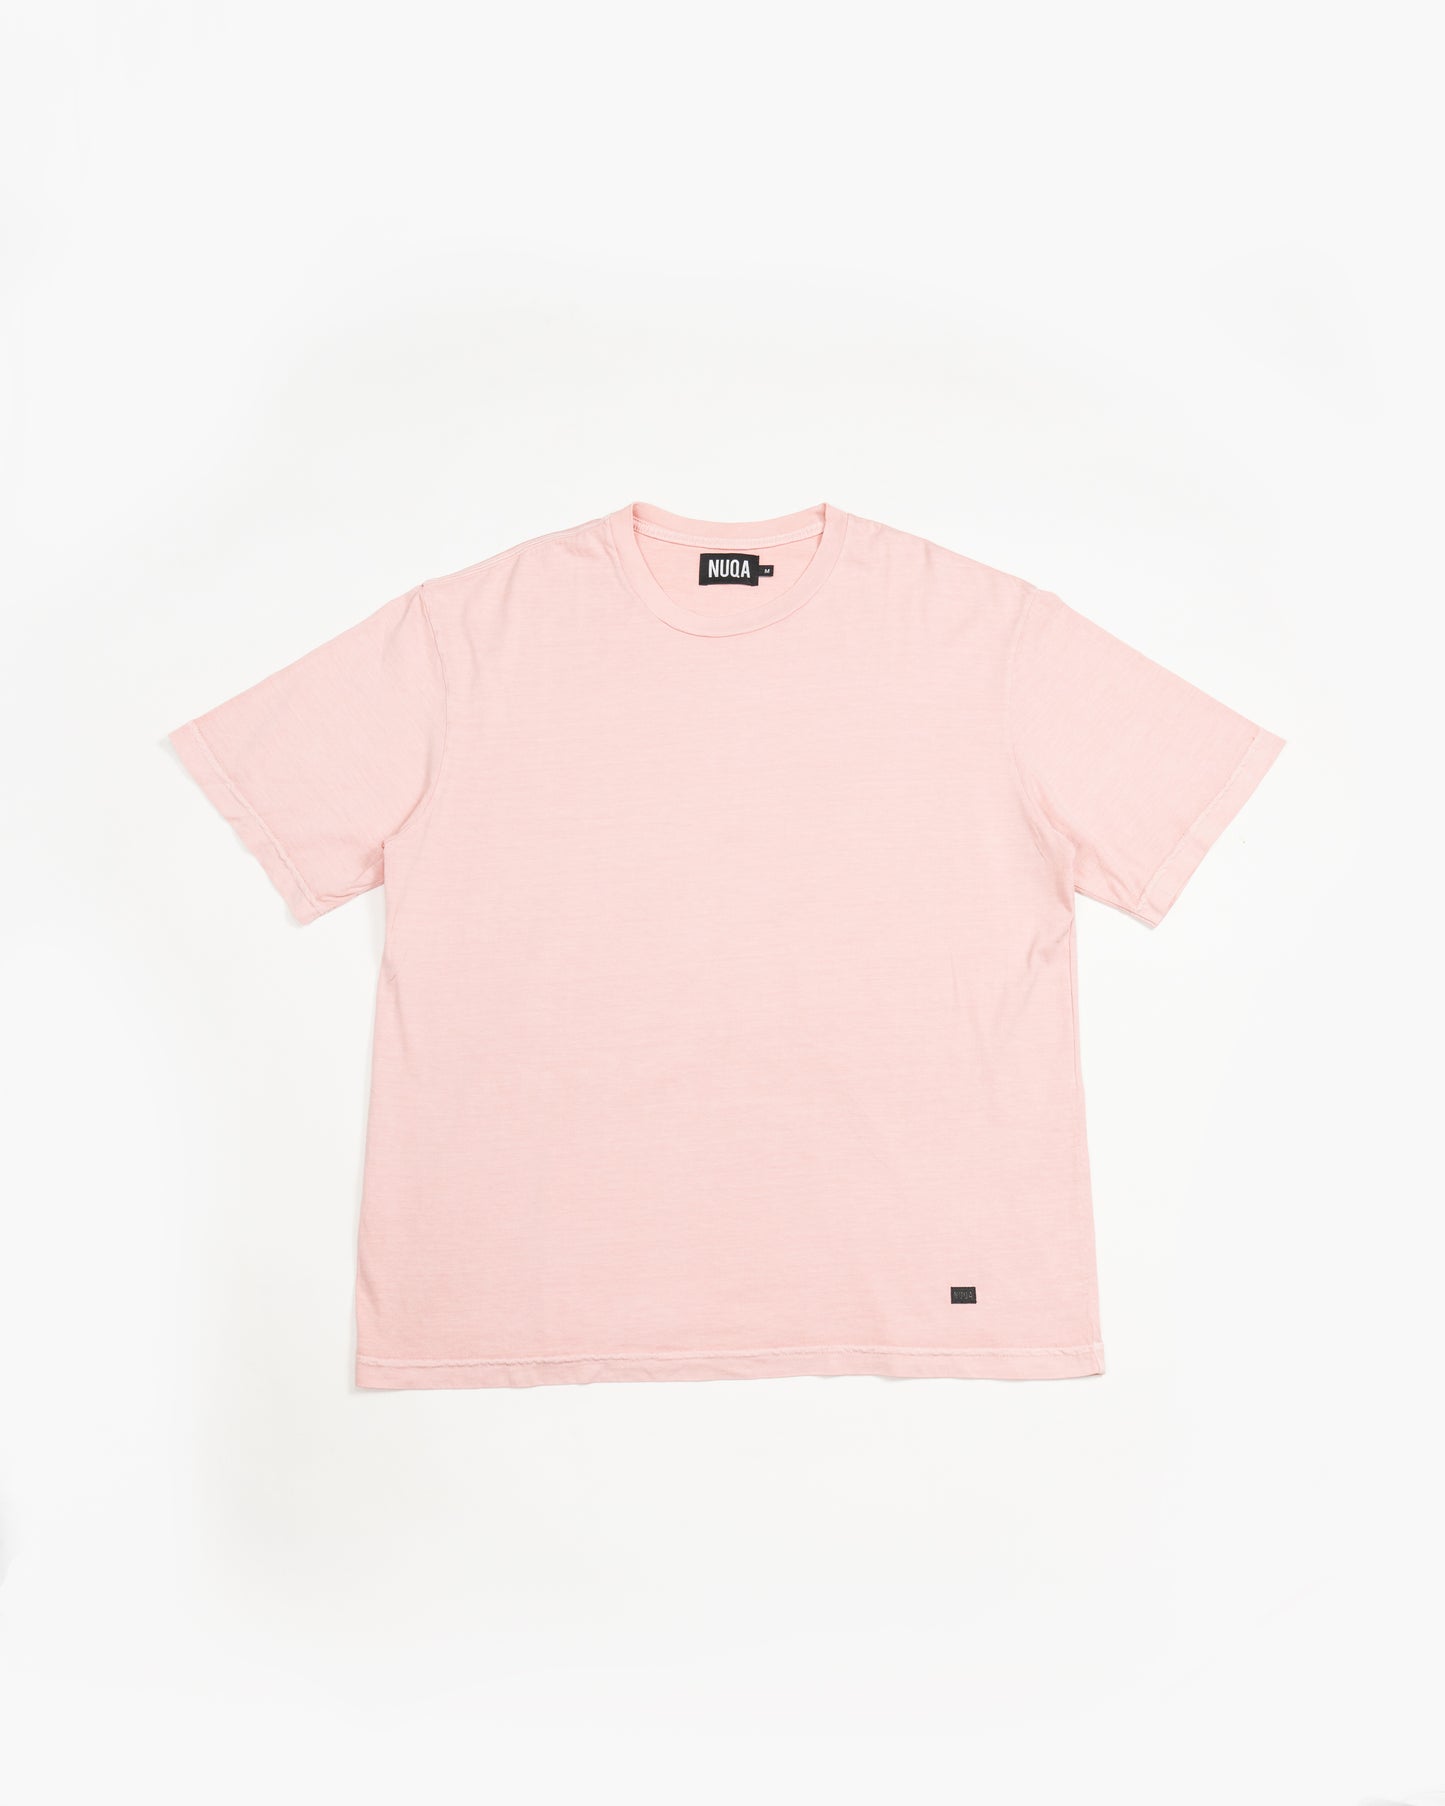 Oversized Washed Tee 24/1 - Coral